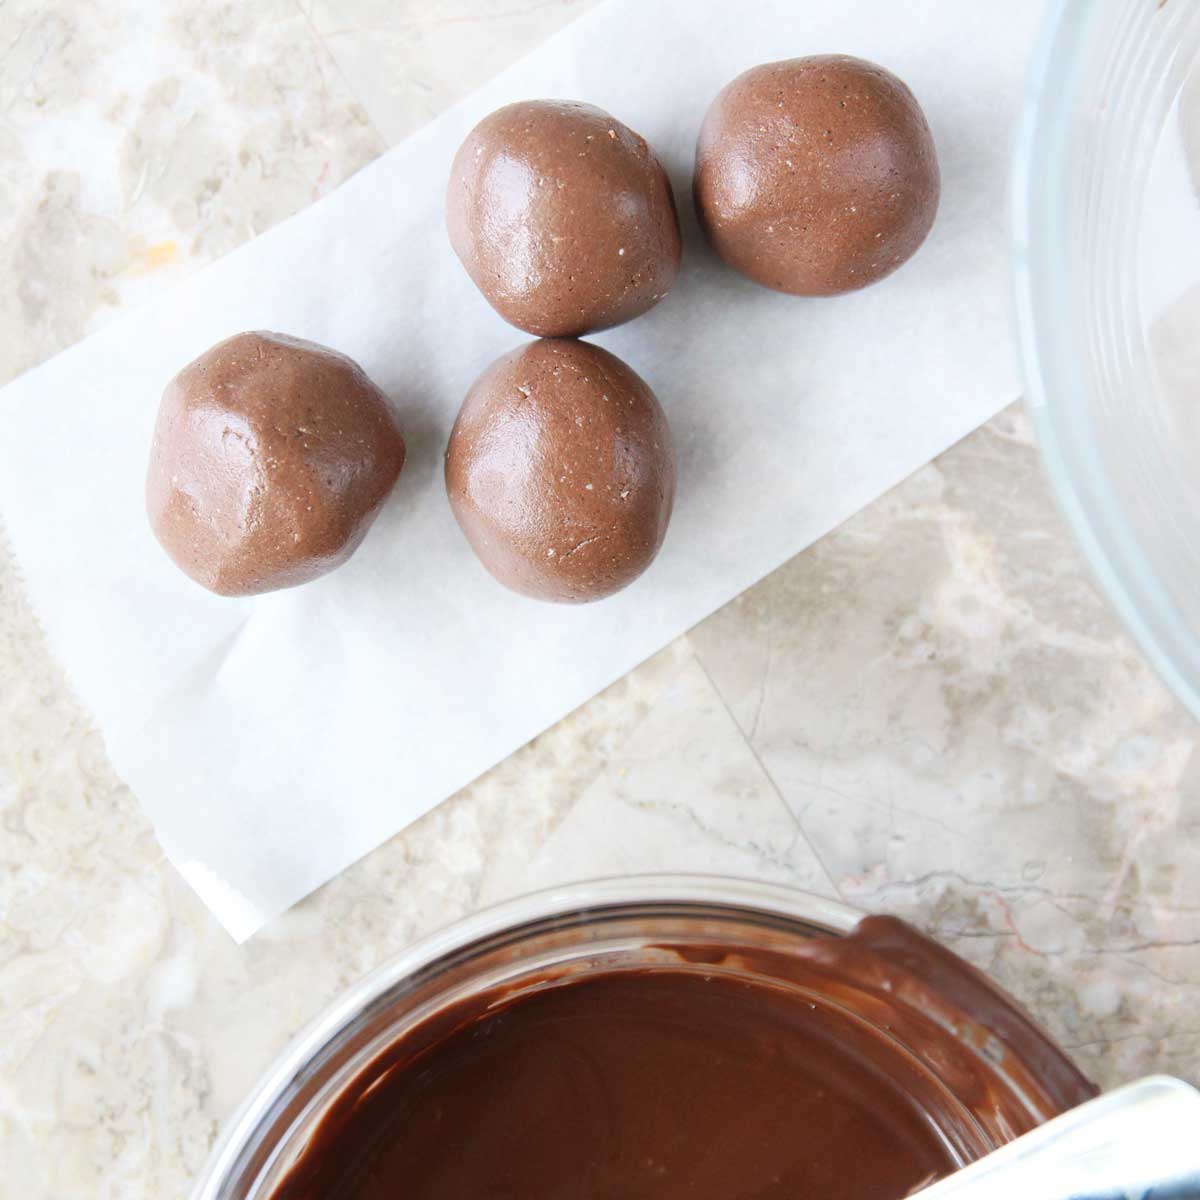 Roll the Nutella protein balls